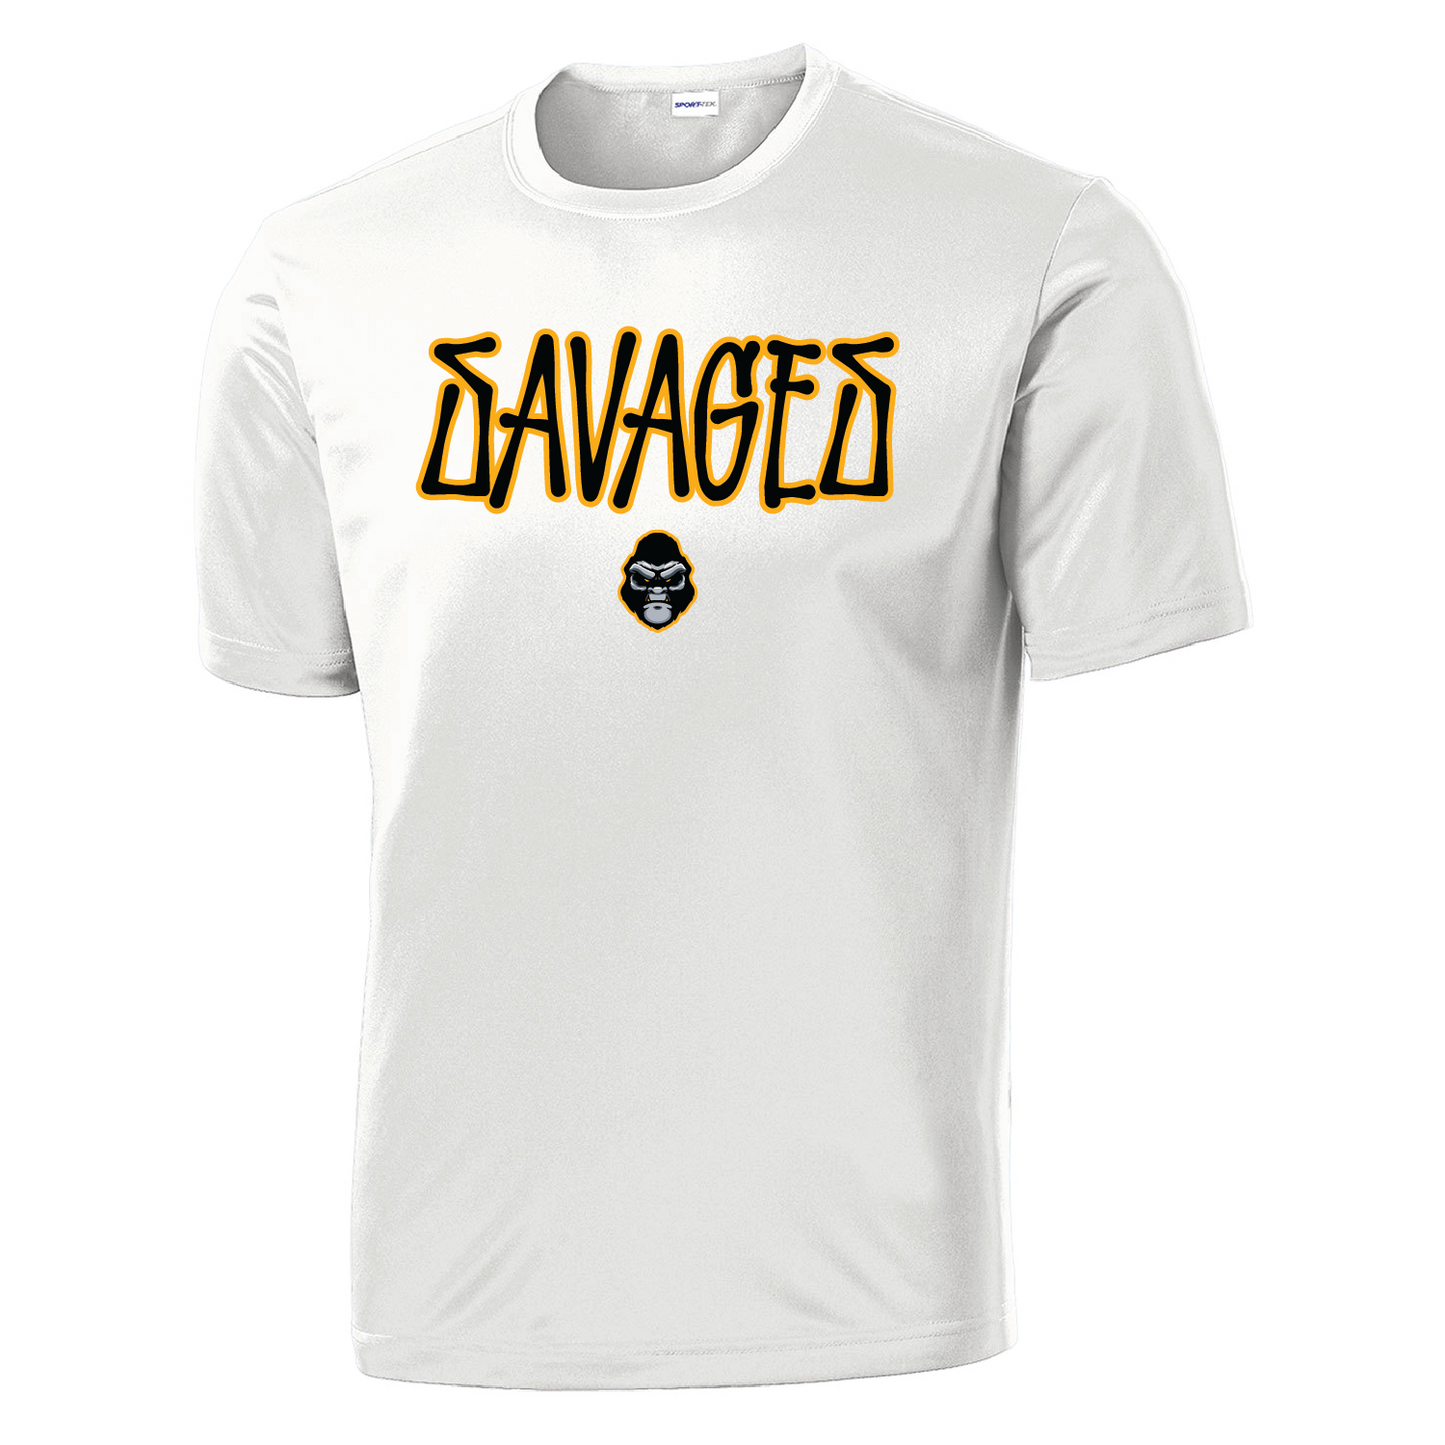 Copy of Savages Coaches Moisture Wicking Unisex Long Sleeve Tee